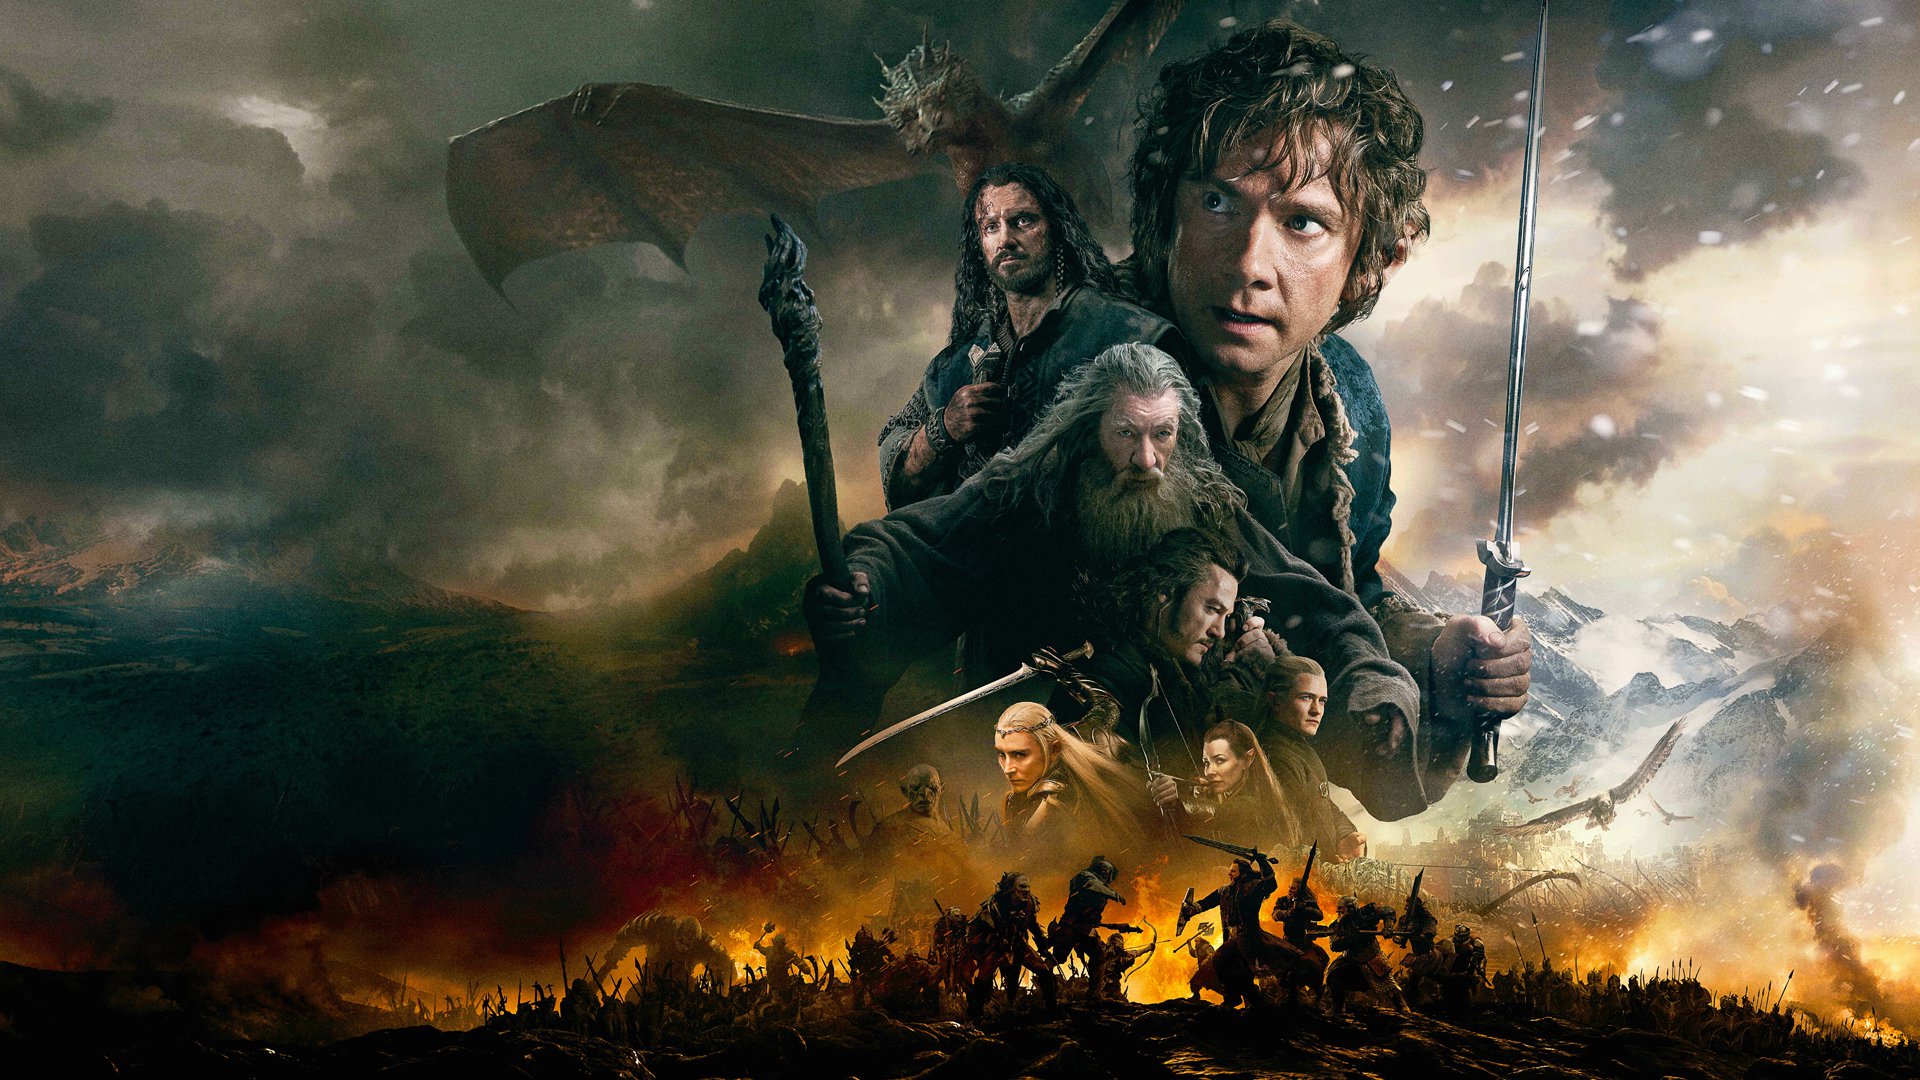 The Hobbit The Battle Of The Five Armies Wallpapers, Pictures, Images